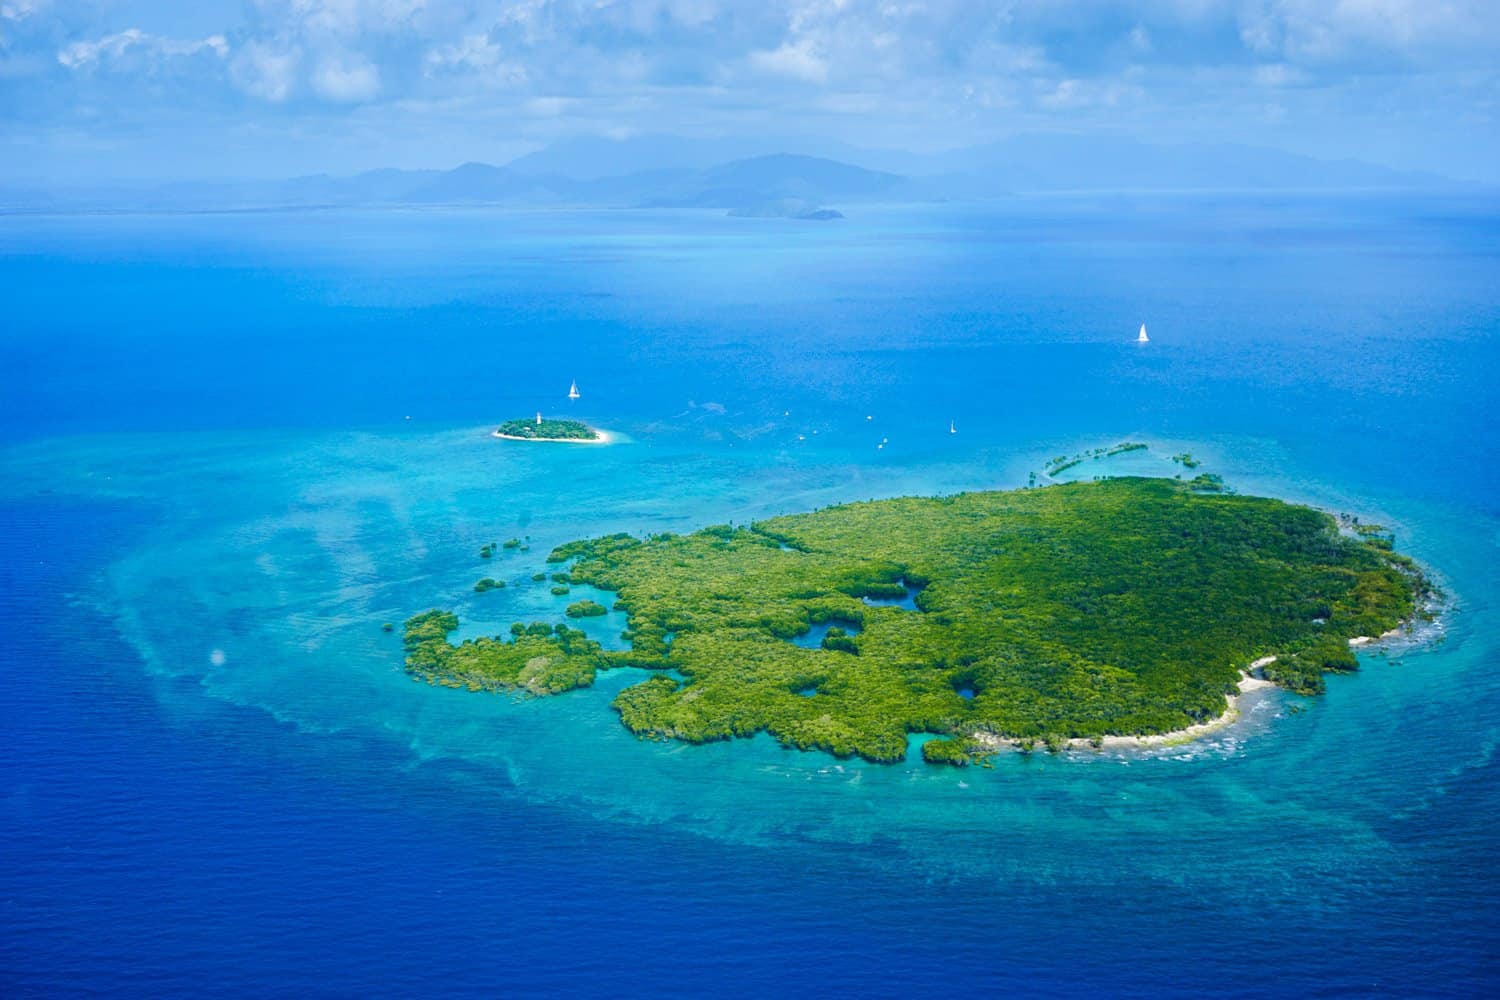 Island near Great Barrier Reef from above